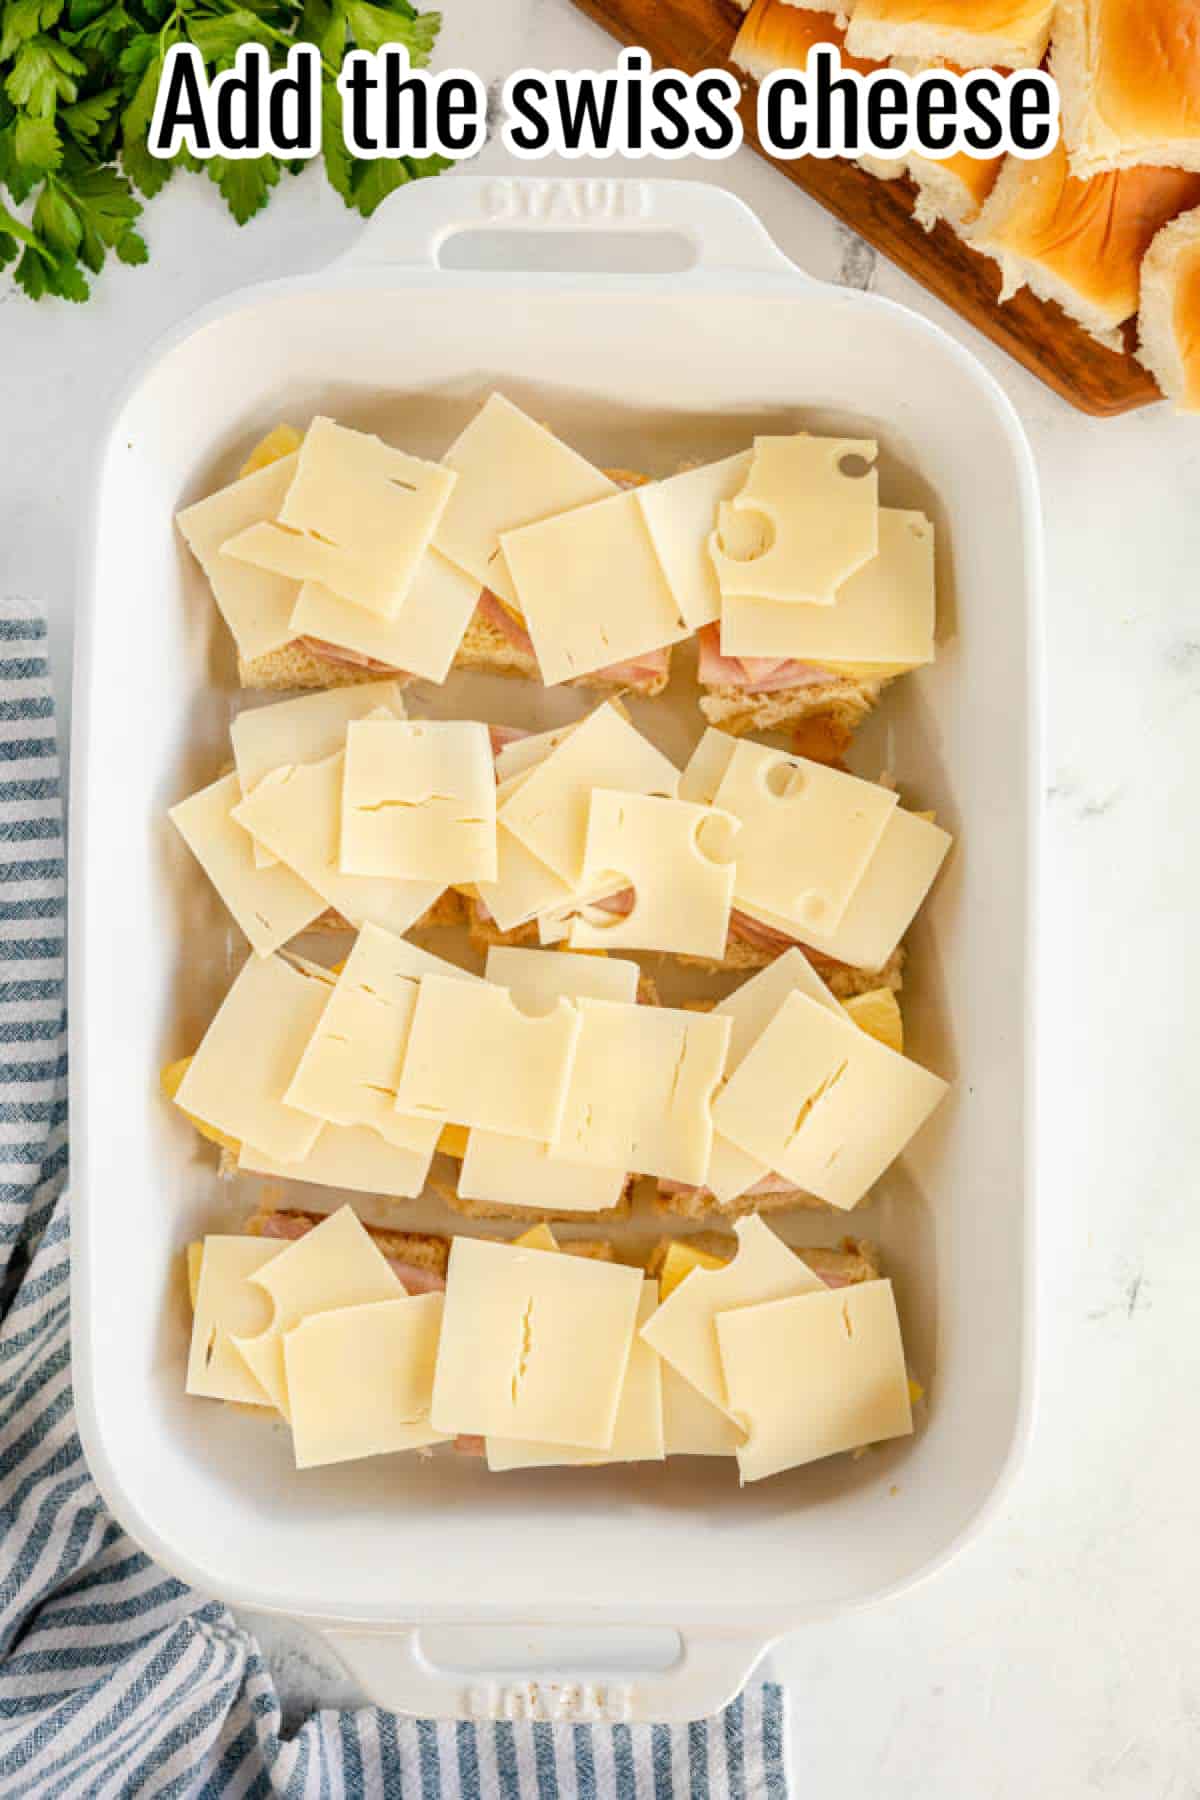 Add the swiss cheese to the ham and cheese sliders.